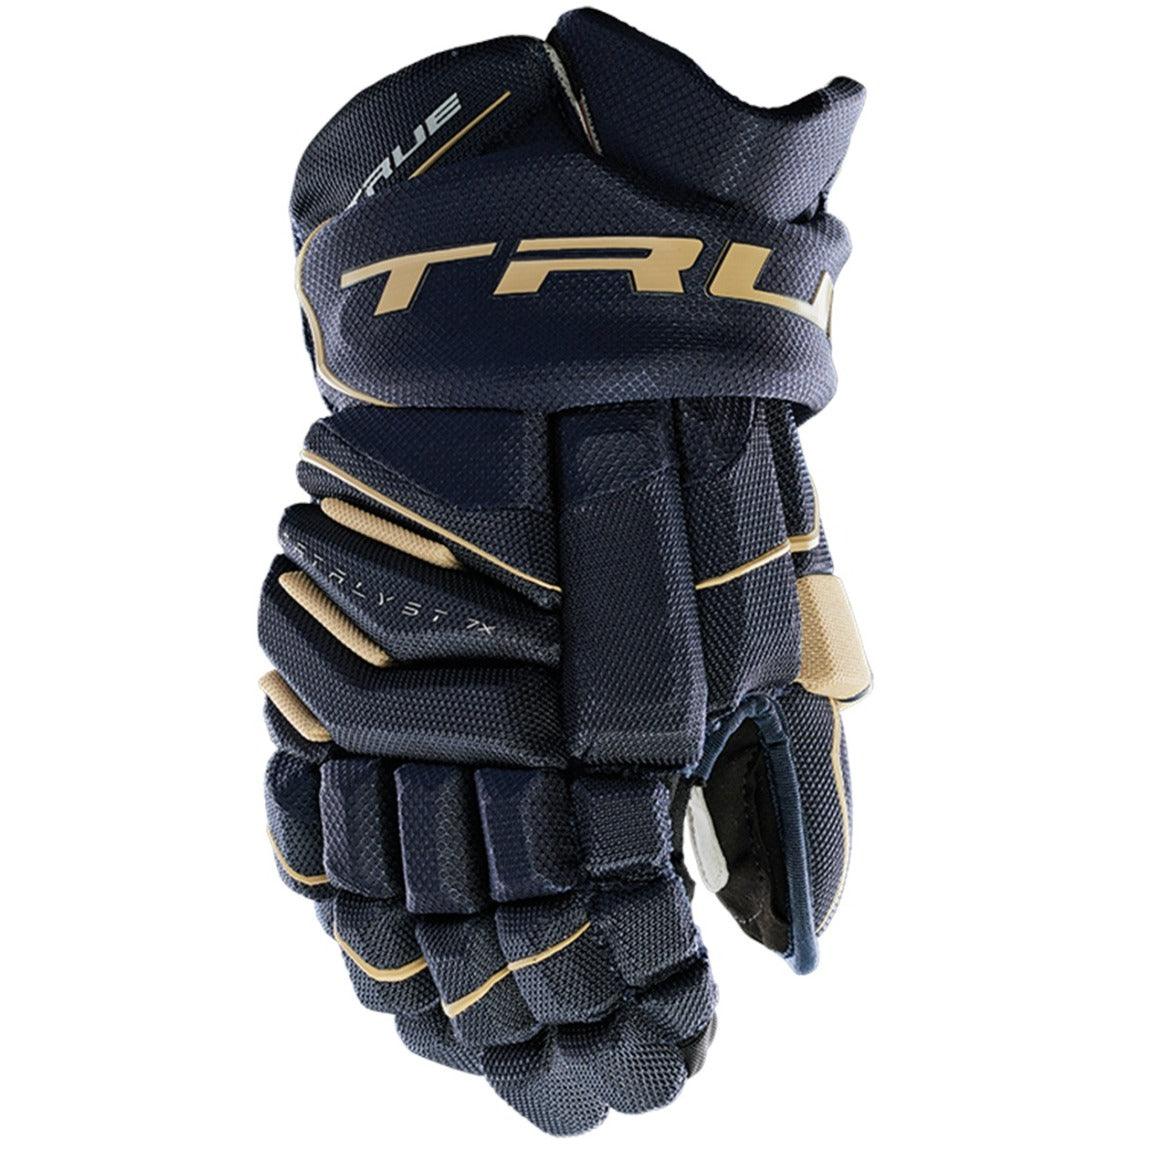 CATALYST 7 Tapered Glove - Sports Excellence